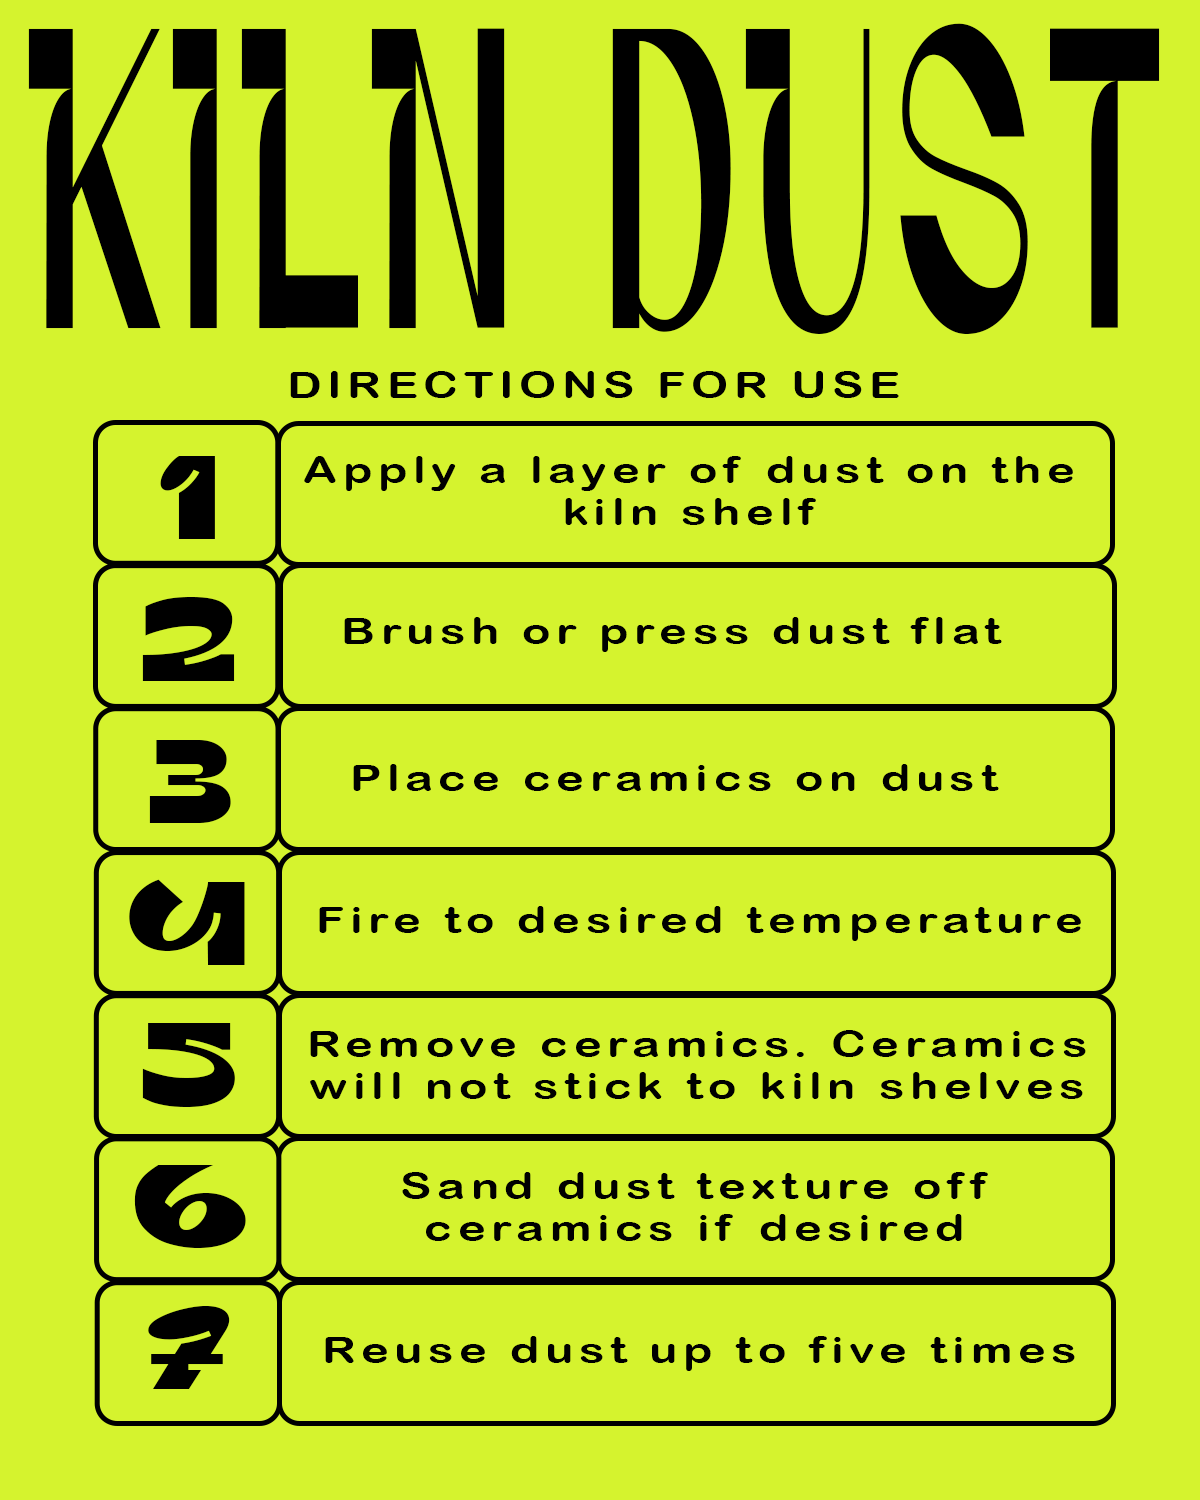 how to apply kiln protection